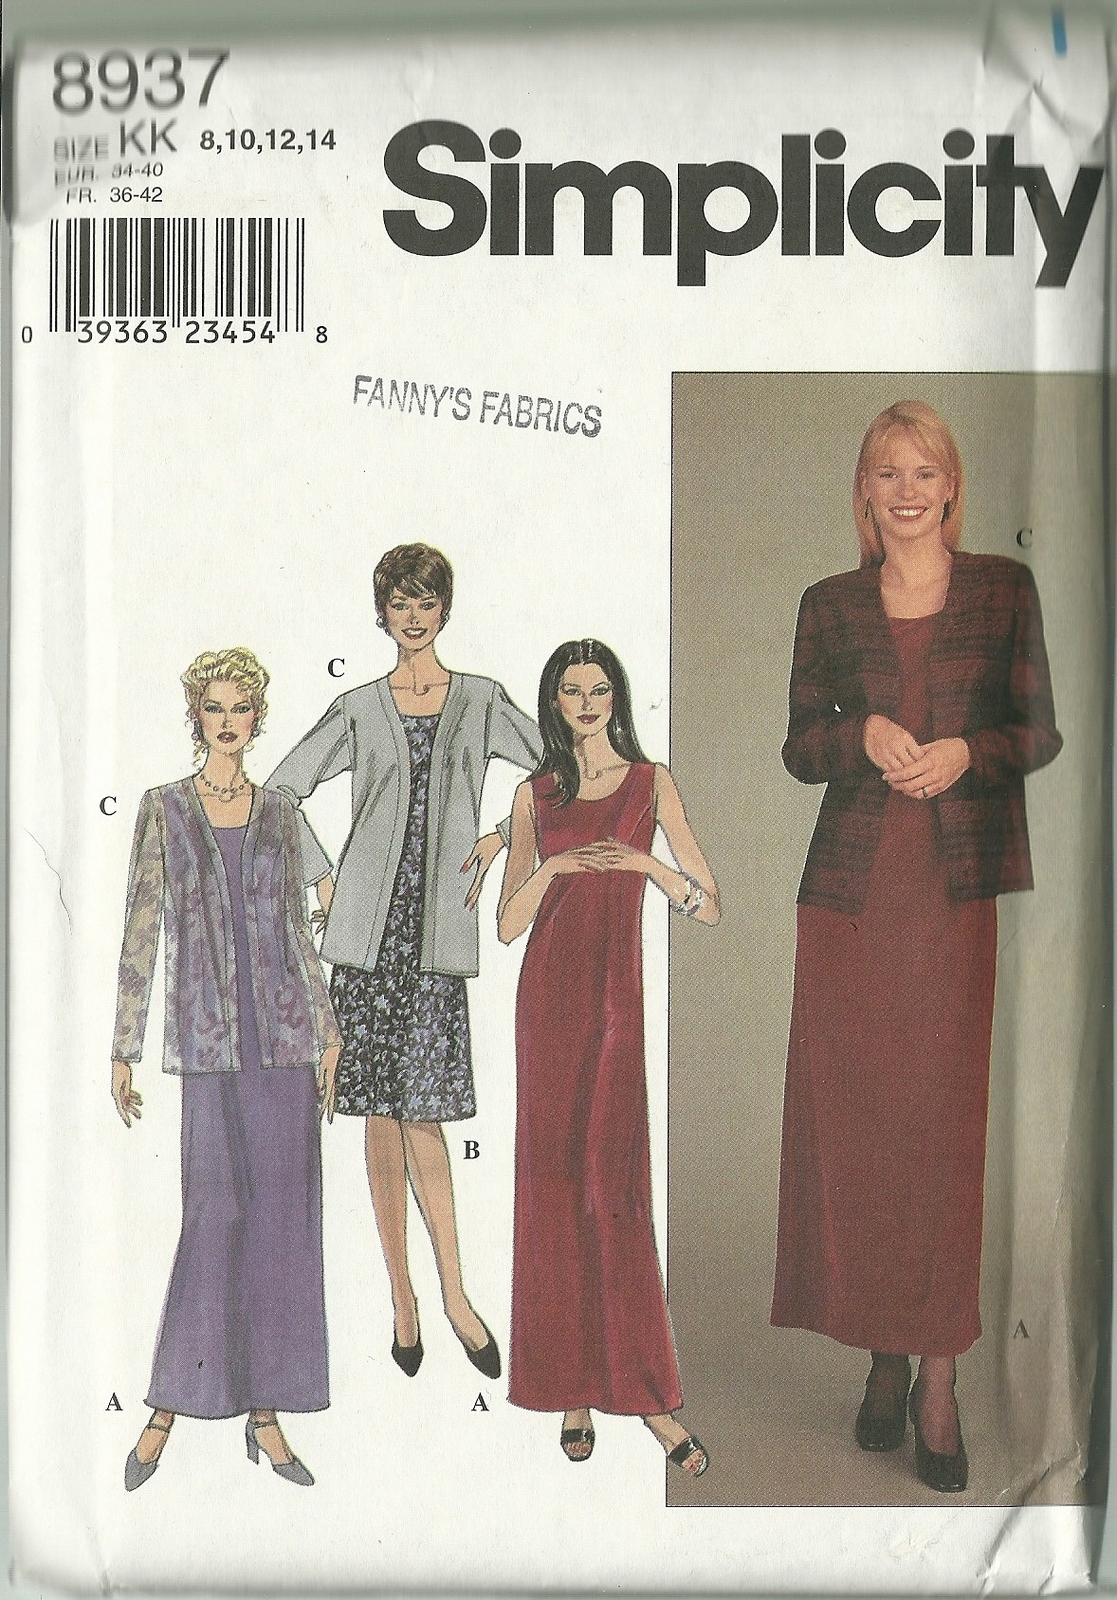 Primary image for Simplicity Sewing Pattern 8937 Misses Womens Dress Jacket Size 8 10 12 14 New